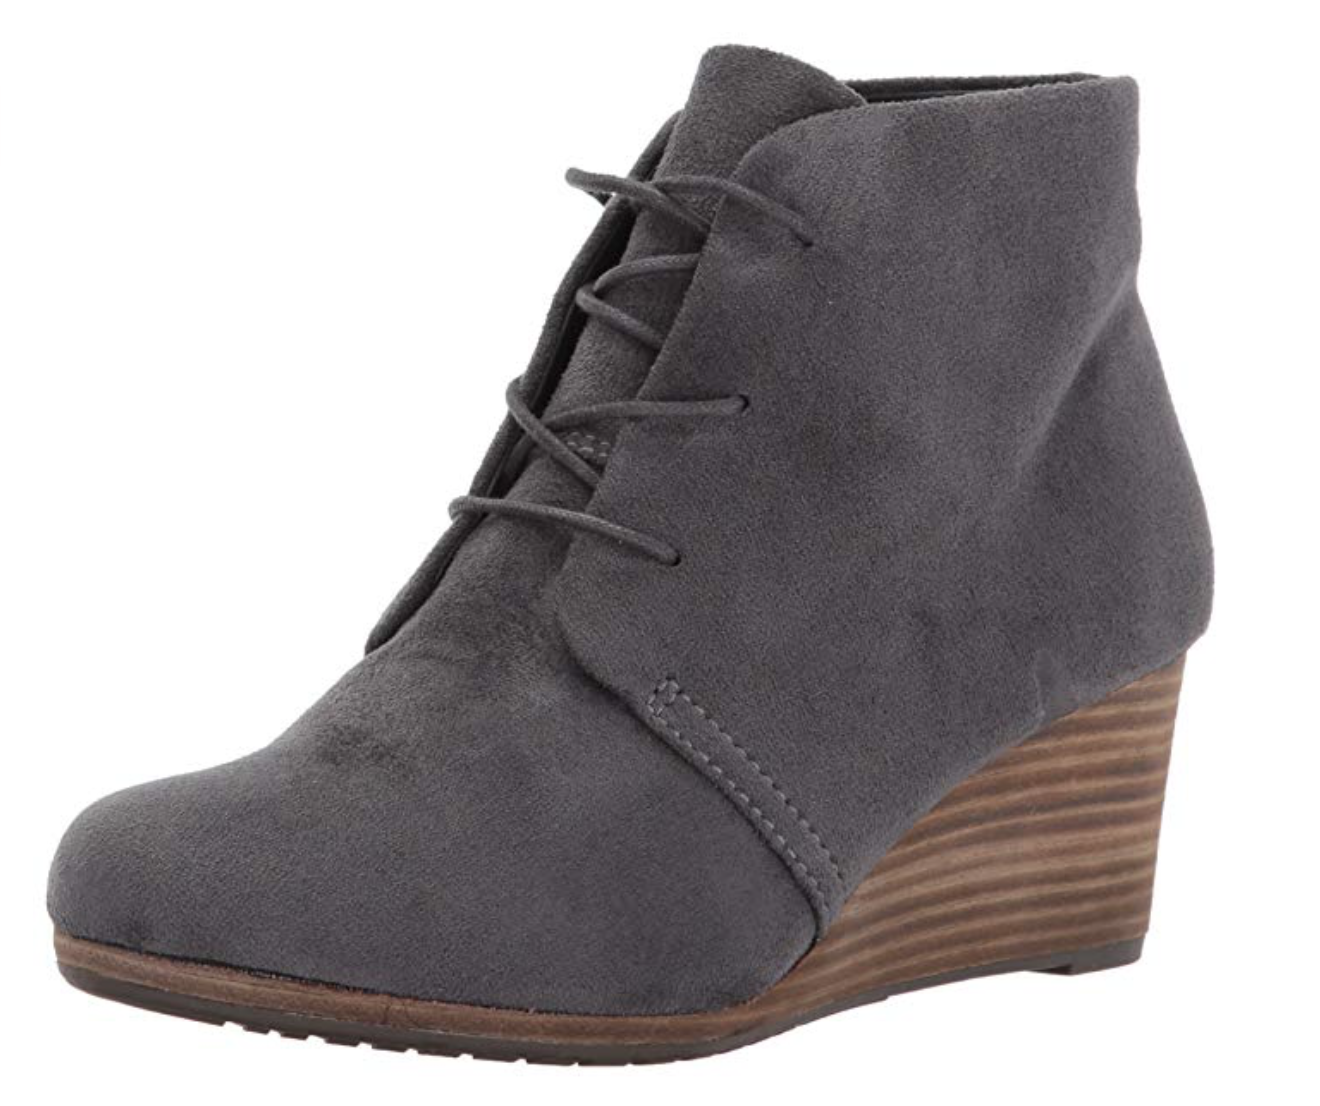 20 Best Winter Boots for Women - Moms On The Clock